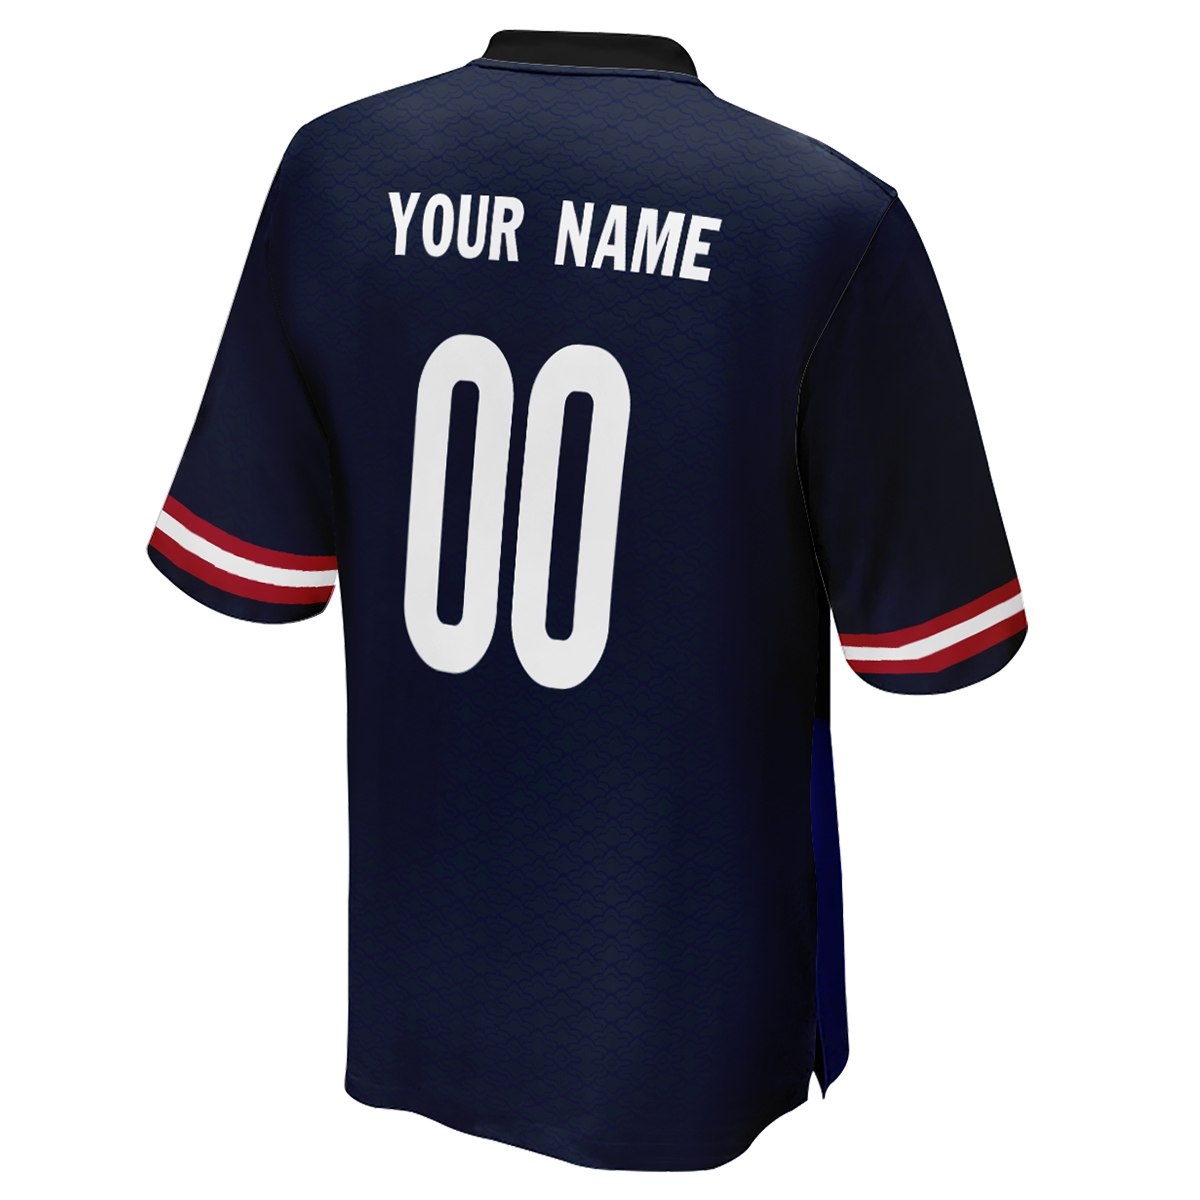 Custom Men's 2022 World Cup America Team Soccer Jerseys With Name